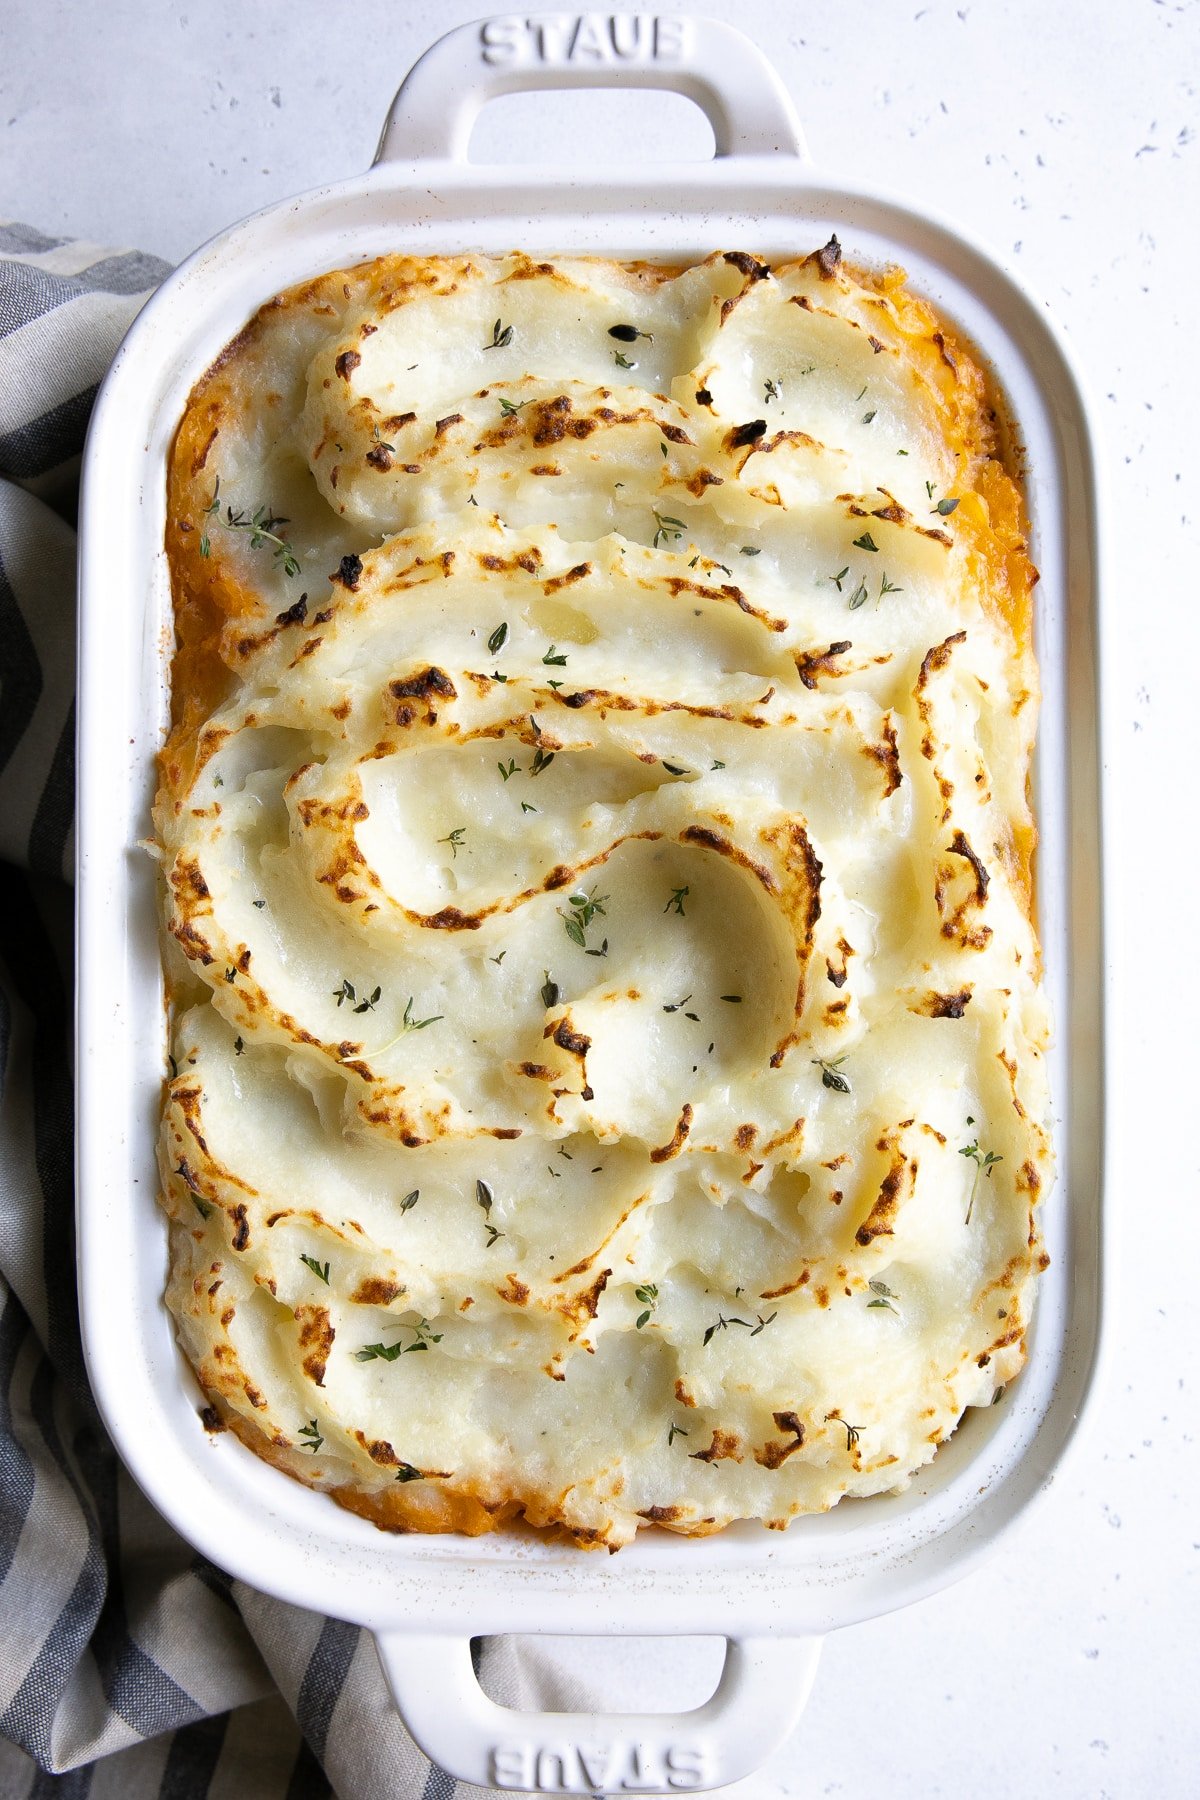 Overhead image of a fully baked Shepherd's pie in a white casserole dish.